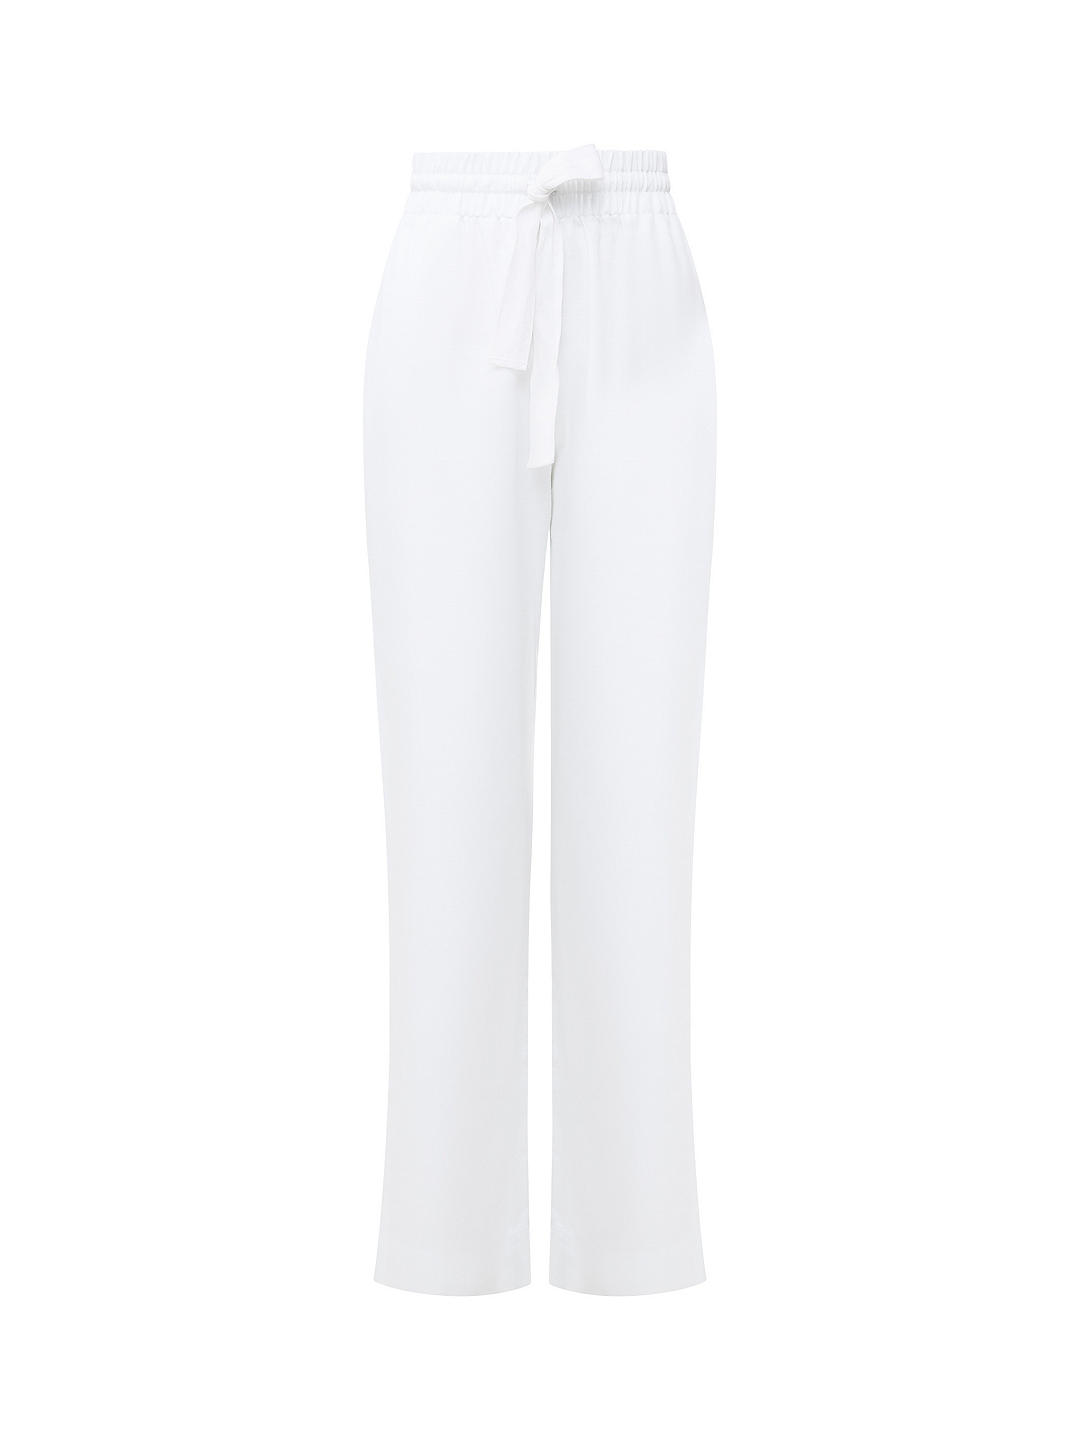 French Connection Bodie Cotton Blend Trousers, Linen White         